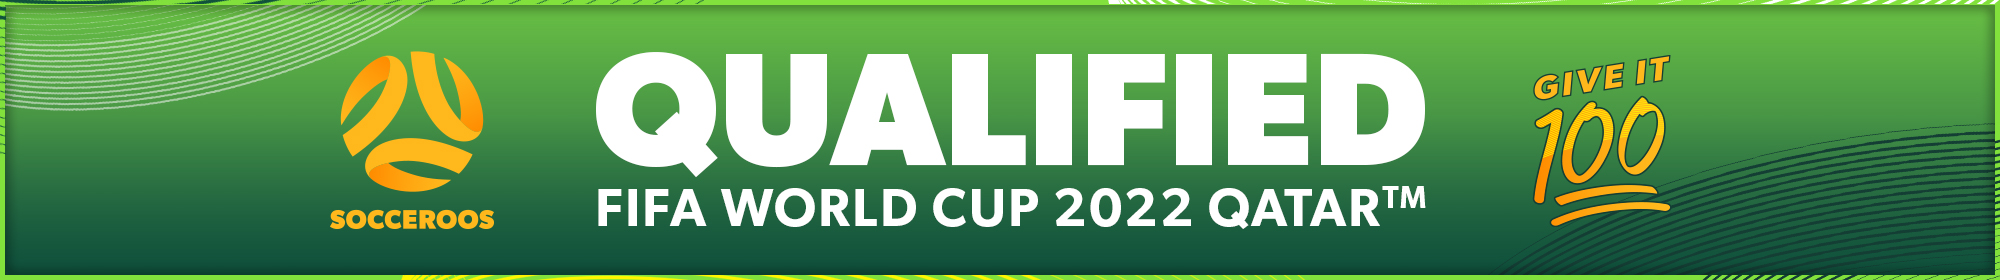 Qualified Graphic World Cup 2022 Qatar Give It 100